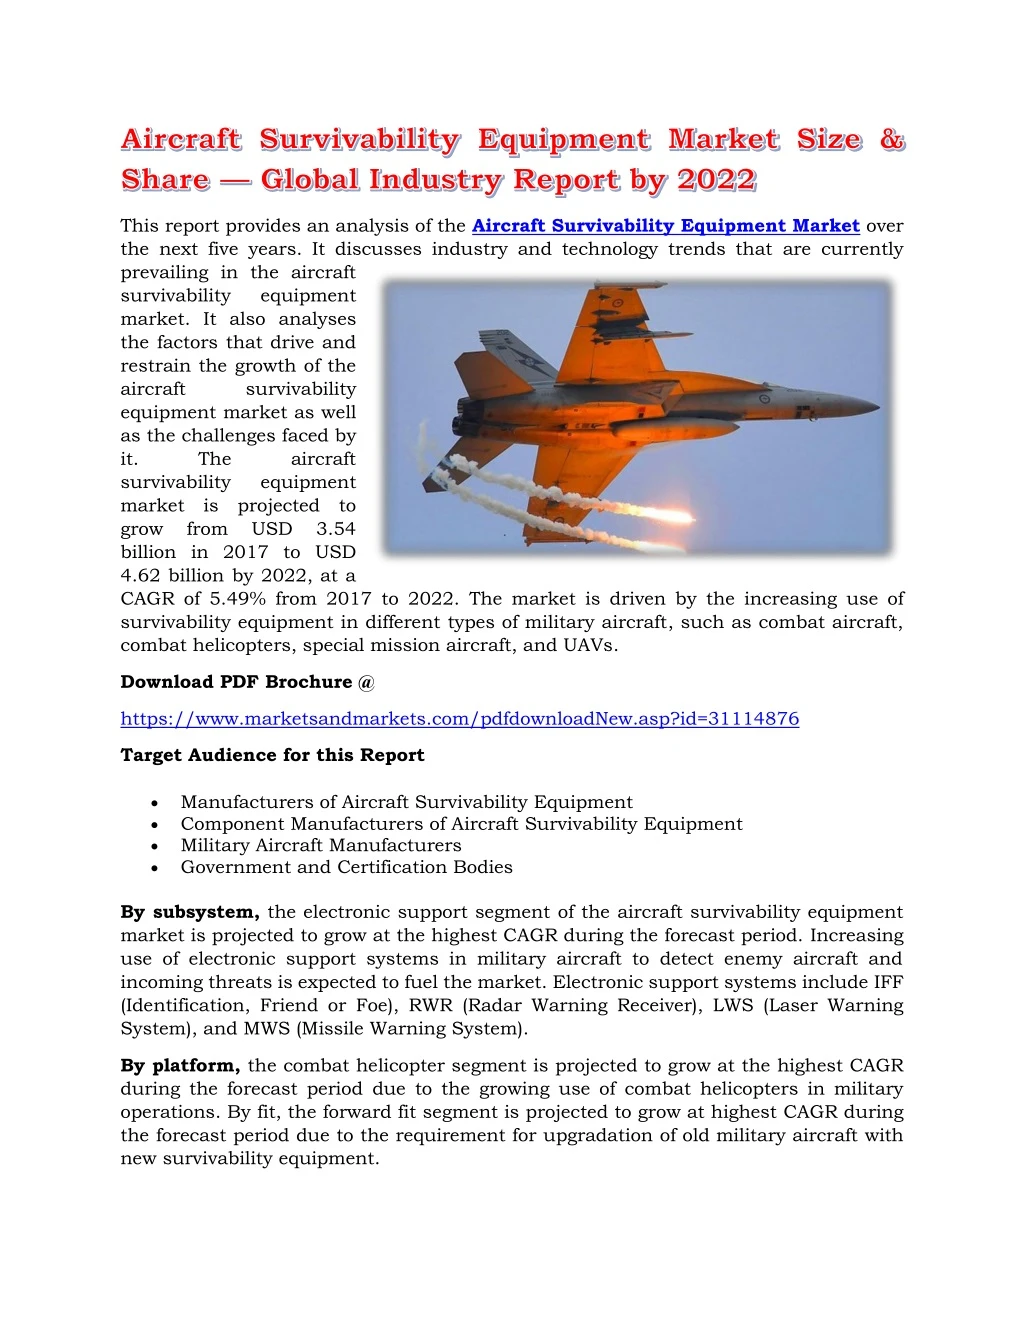 this report provides an analysis of the aircraft